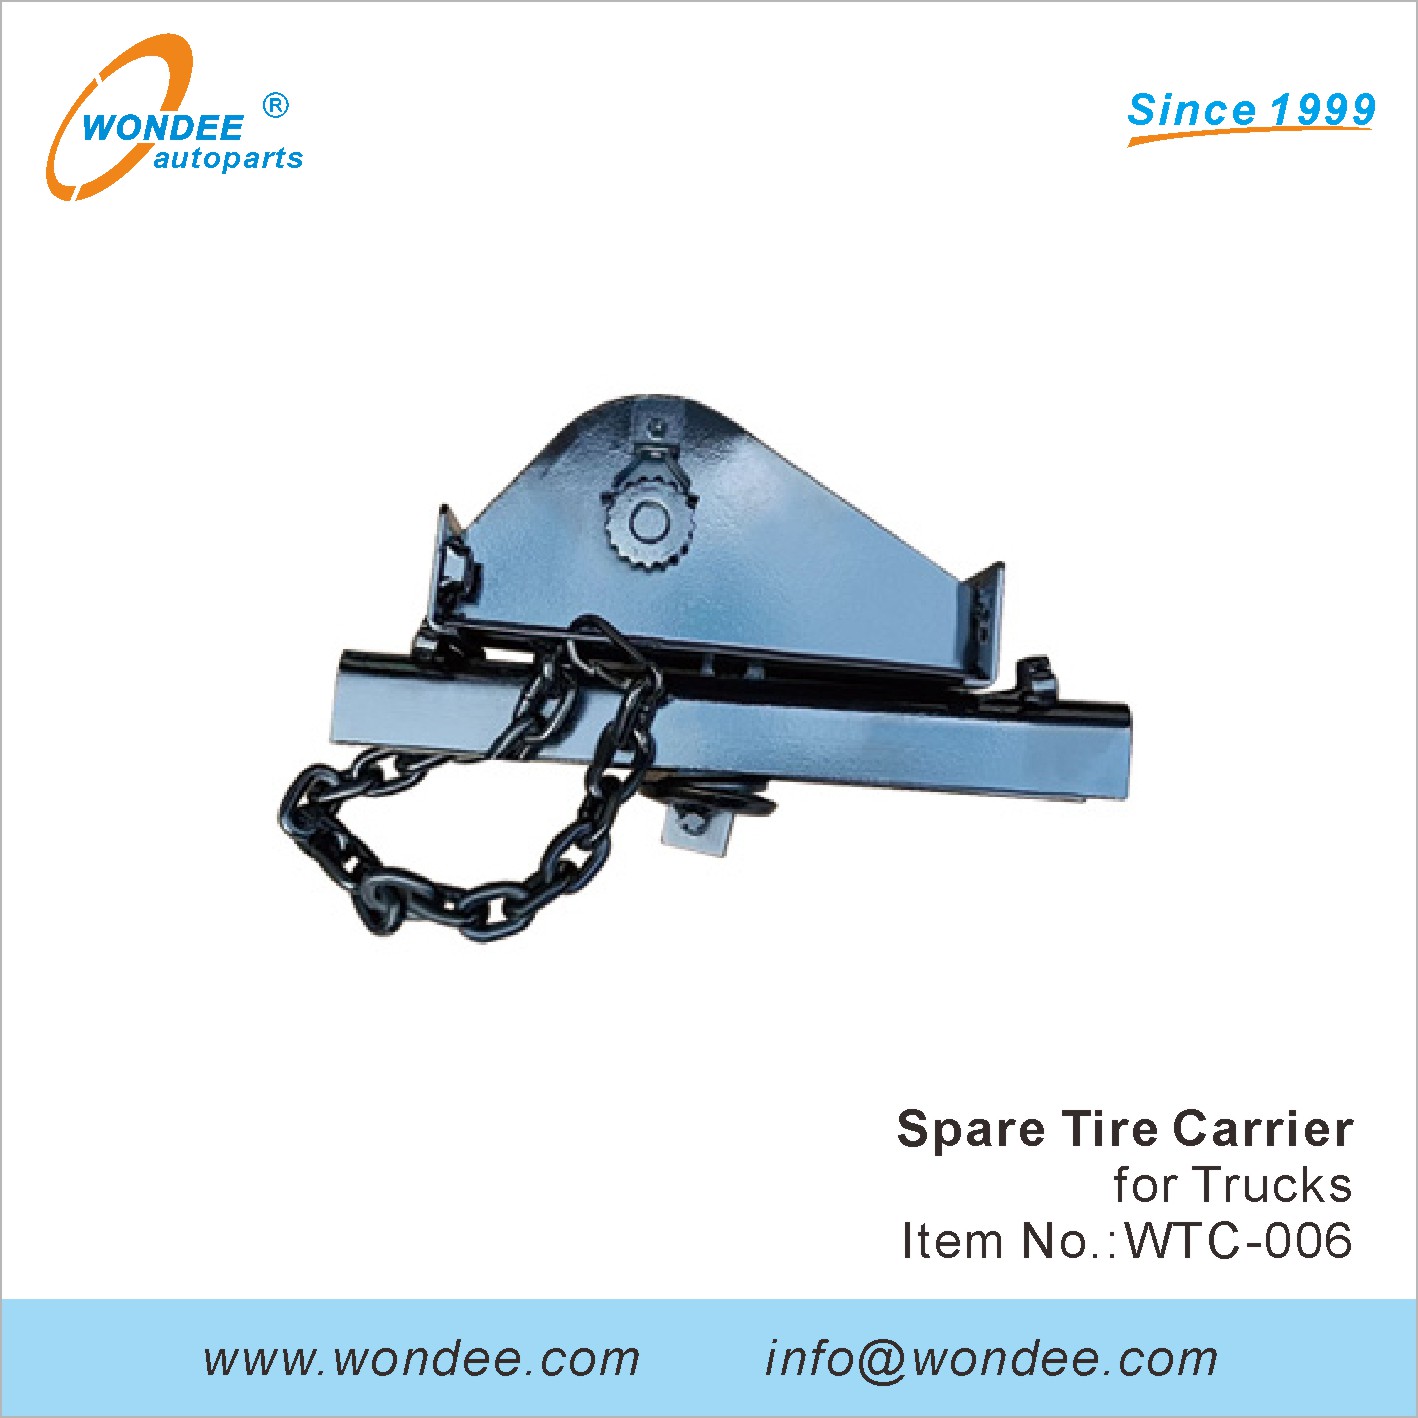 WONDEE spare tire carrier (6)